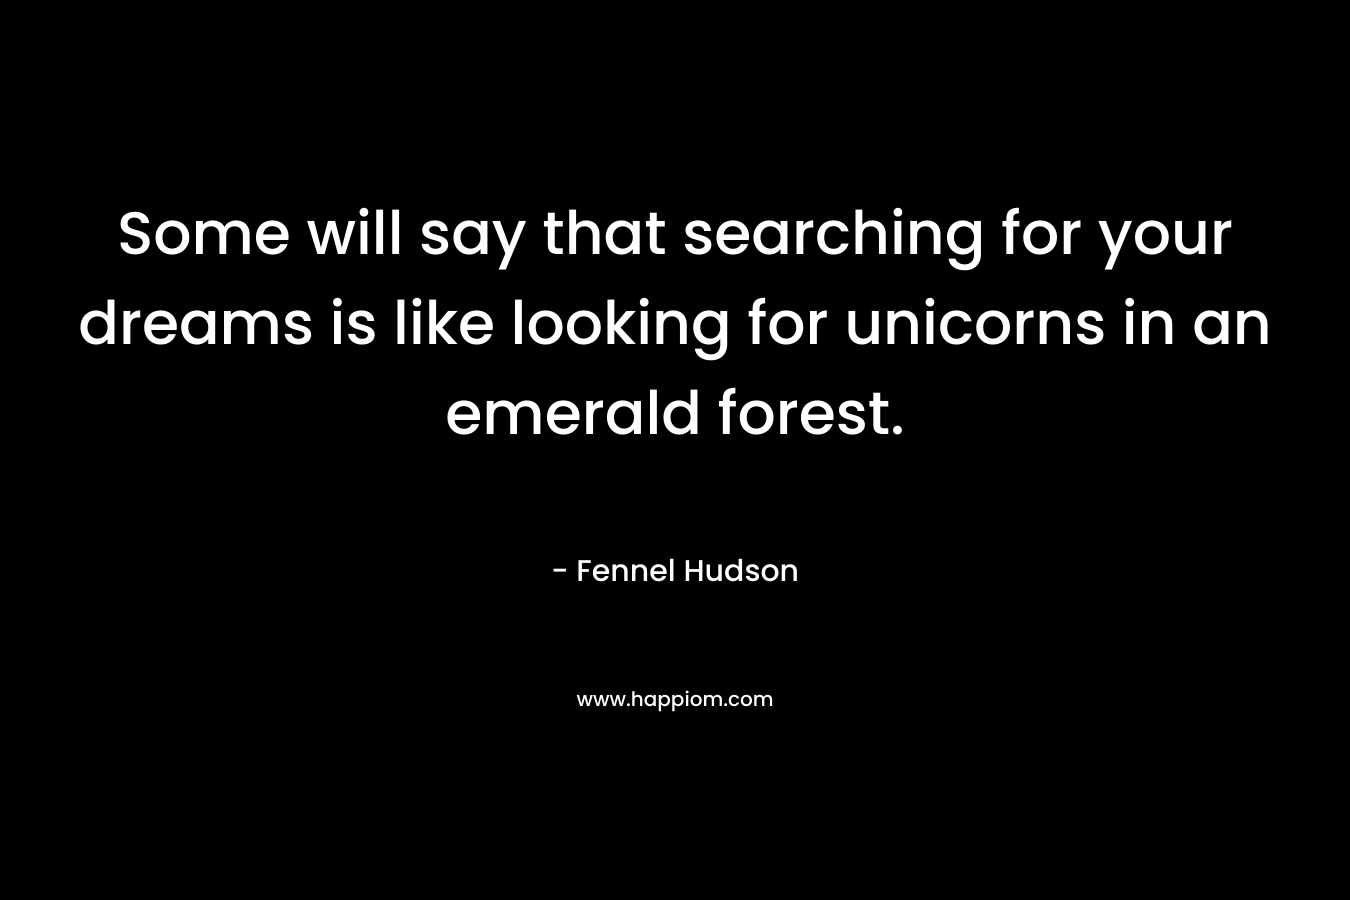 Some will say that searching for your dreams is like looking for unicorns in an emerald forest. – Fennel Hudson